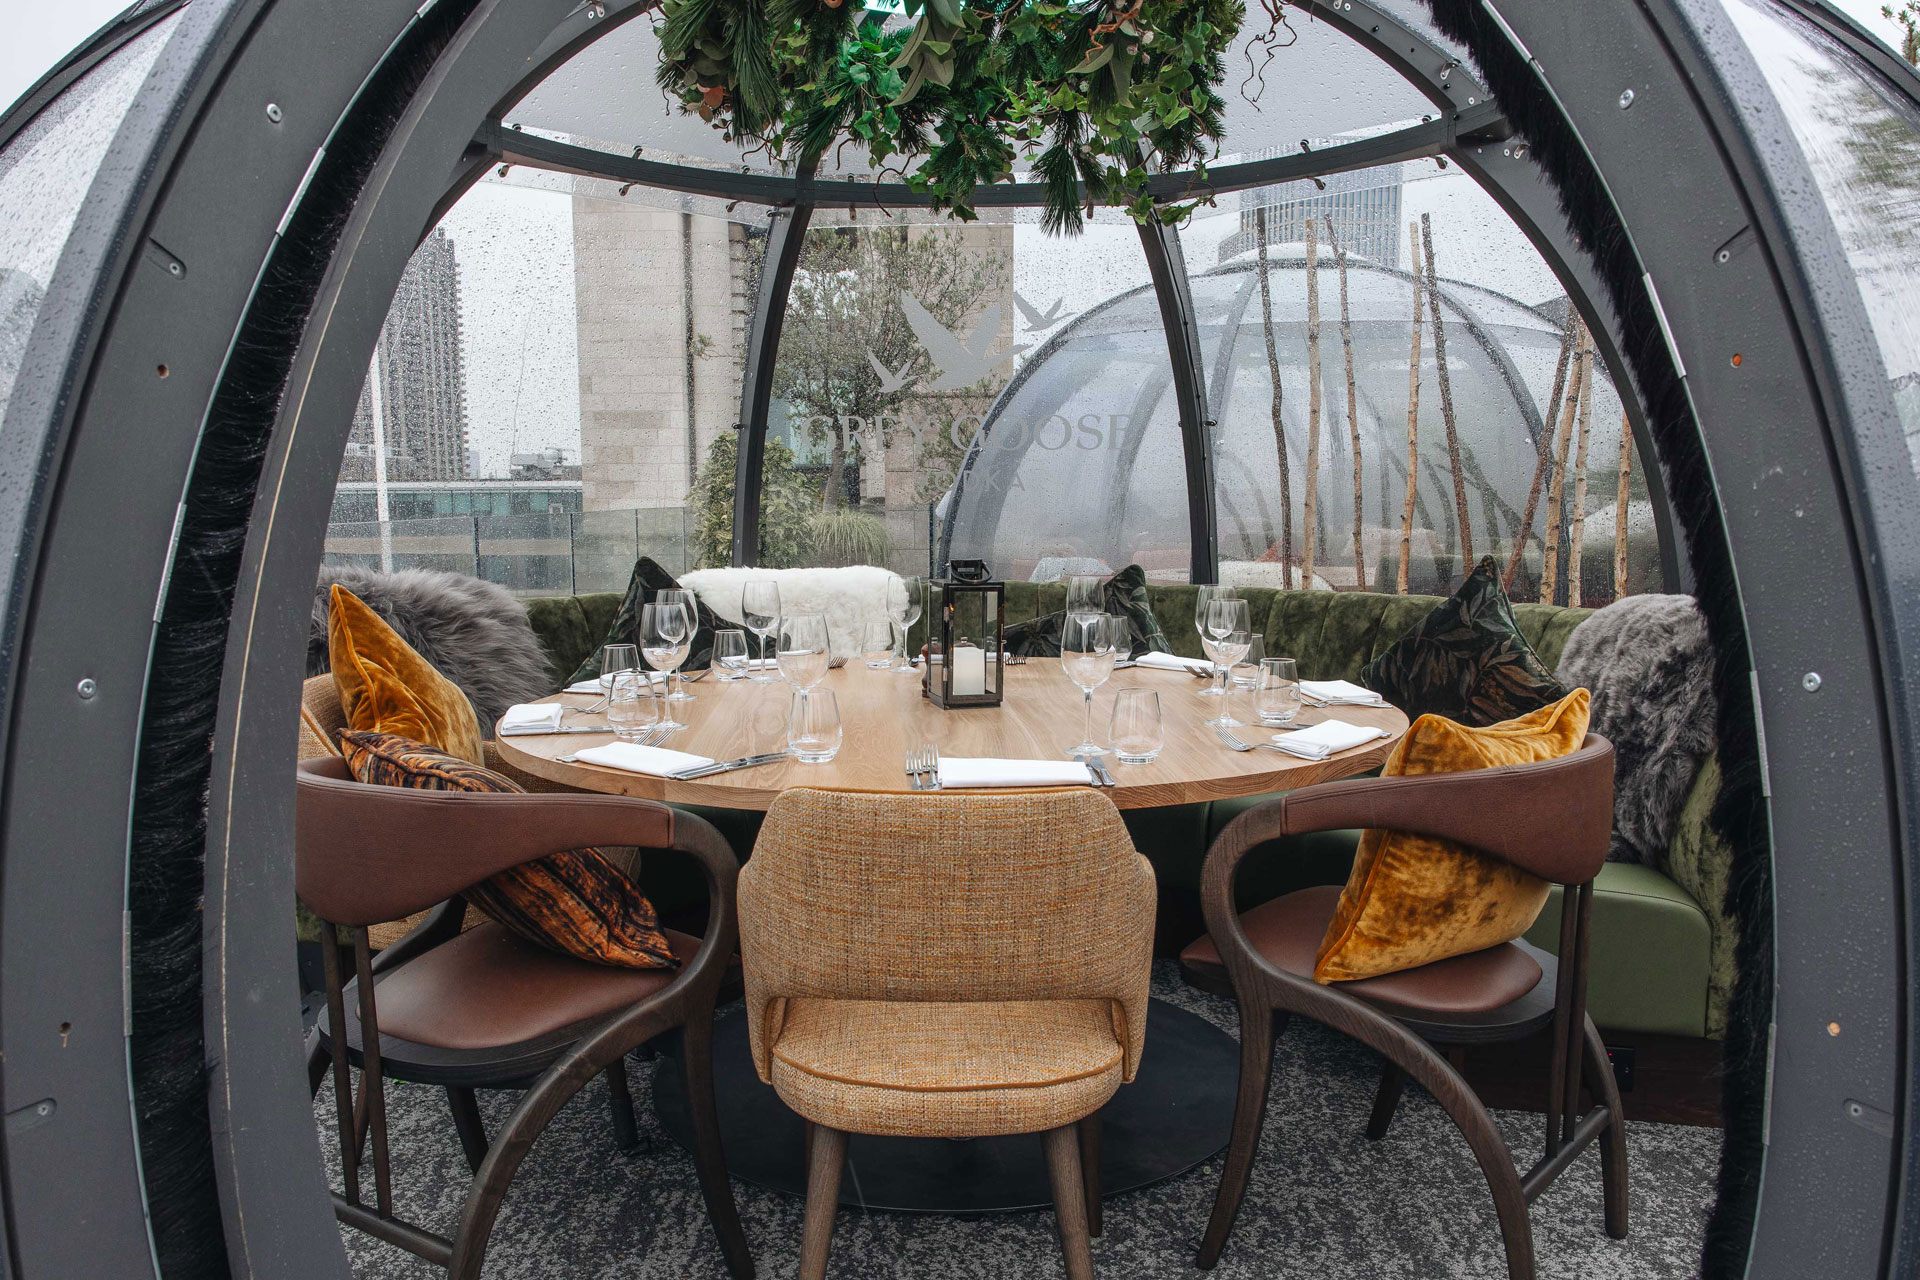 Aviary’s Rooftop Igloos: Private Dining With A Twist